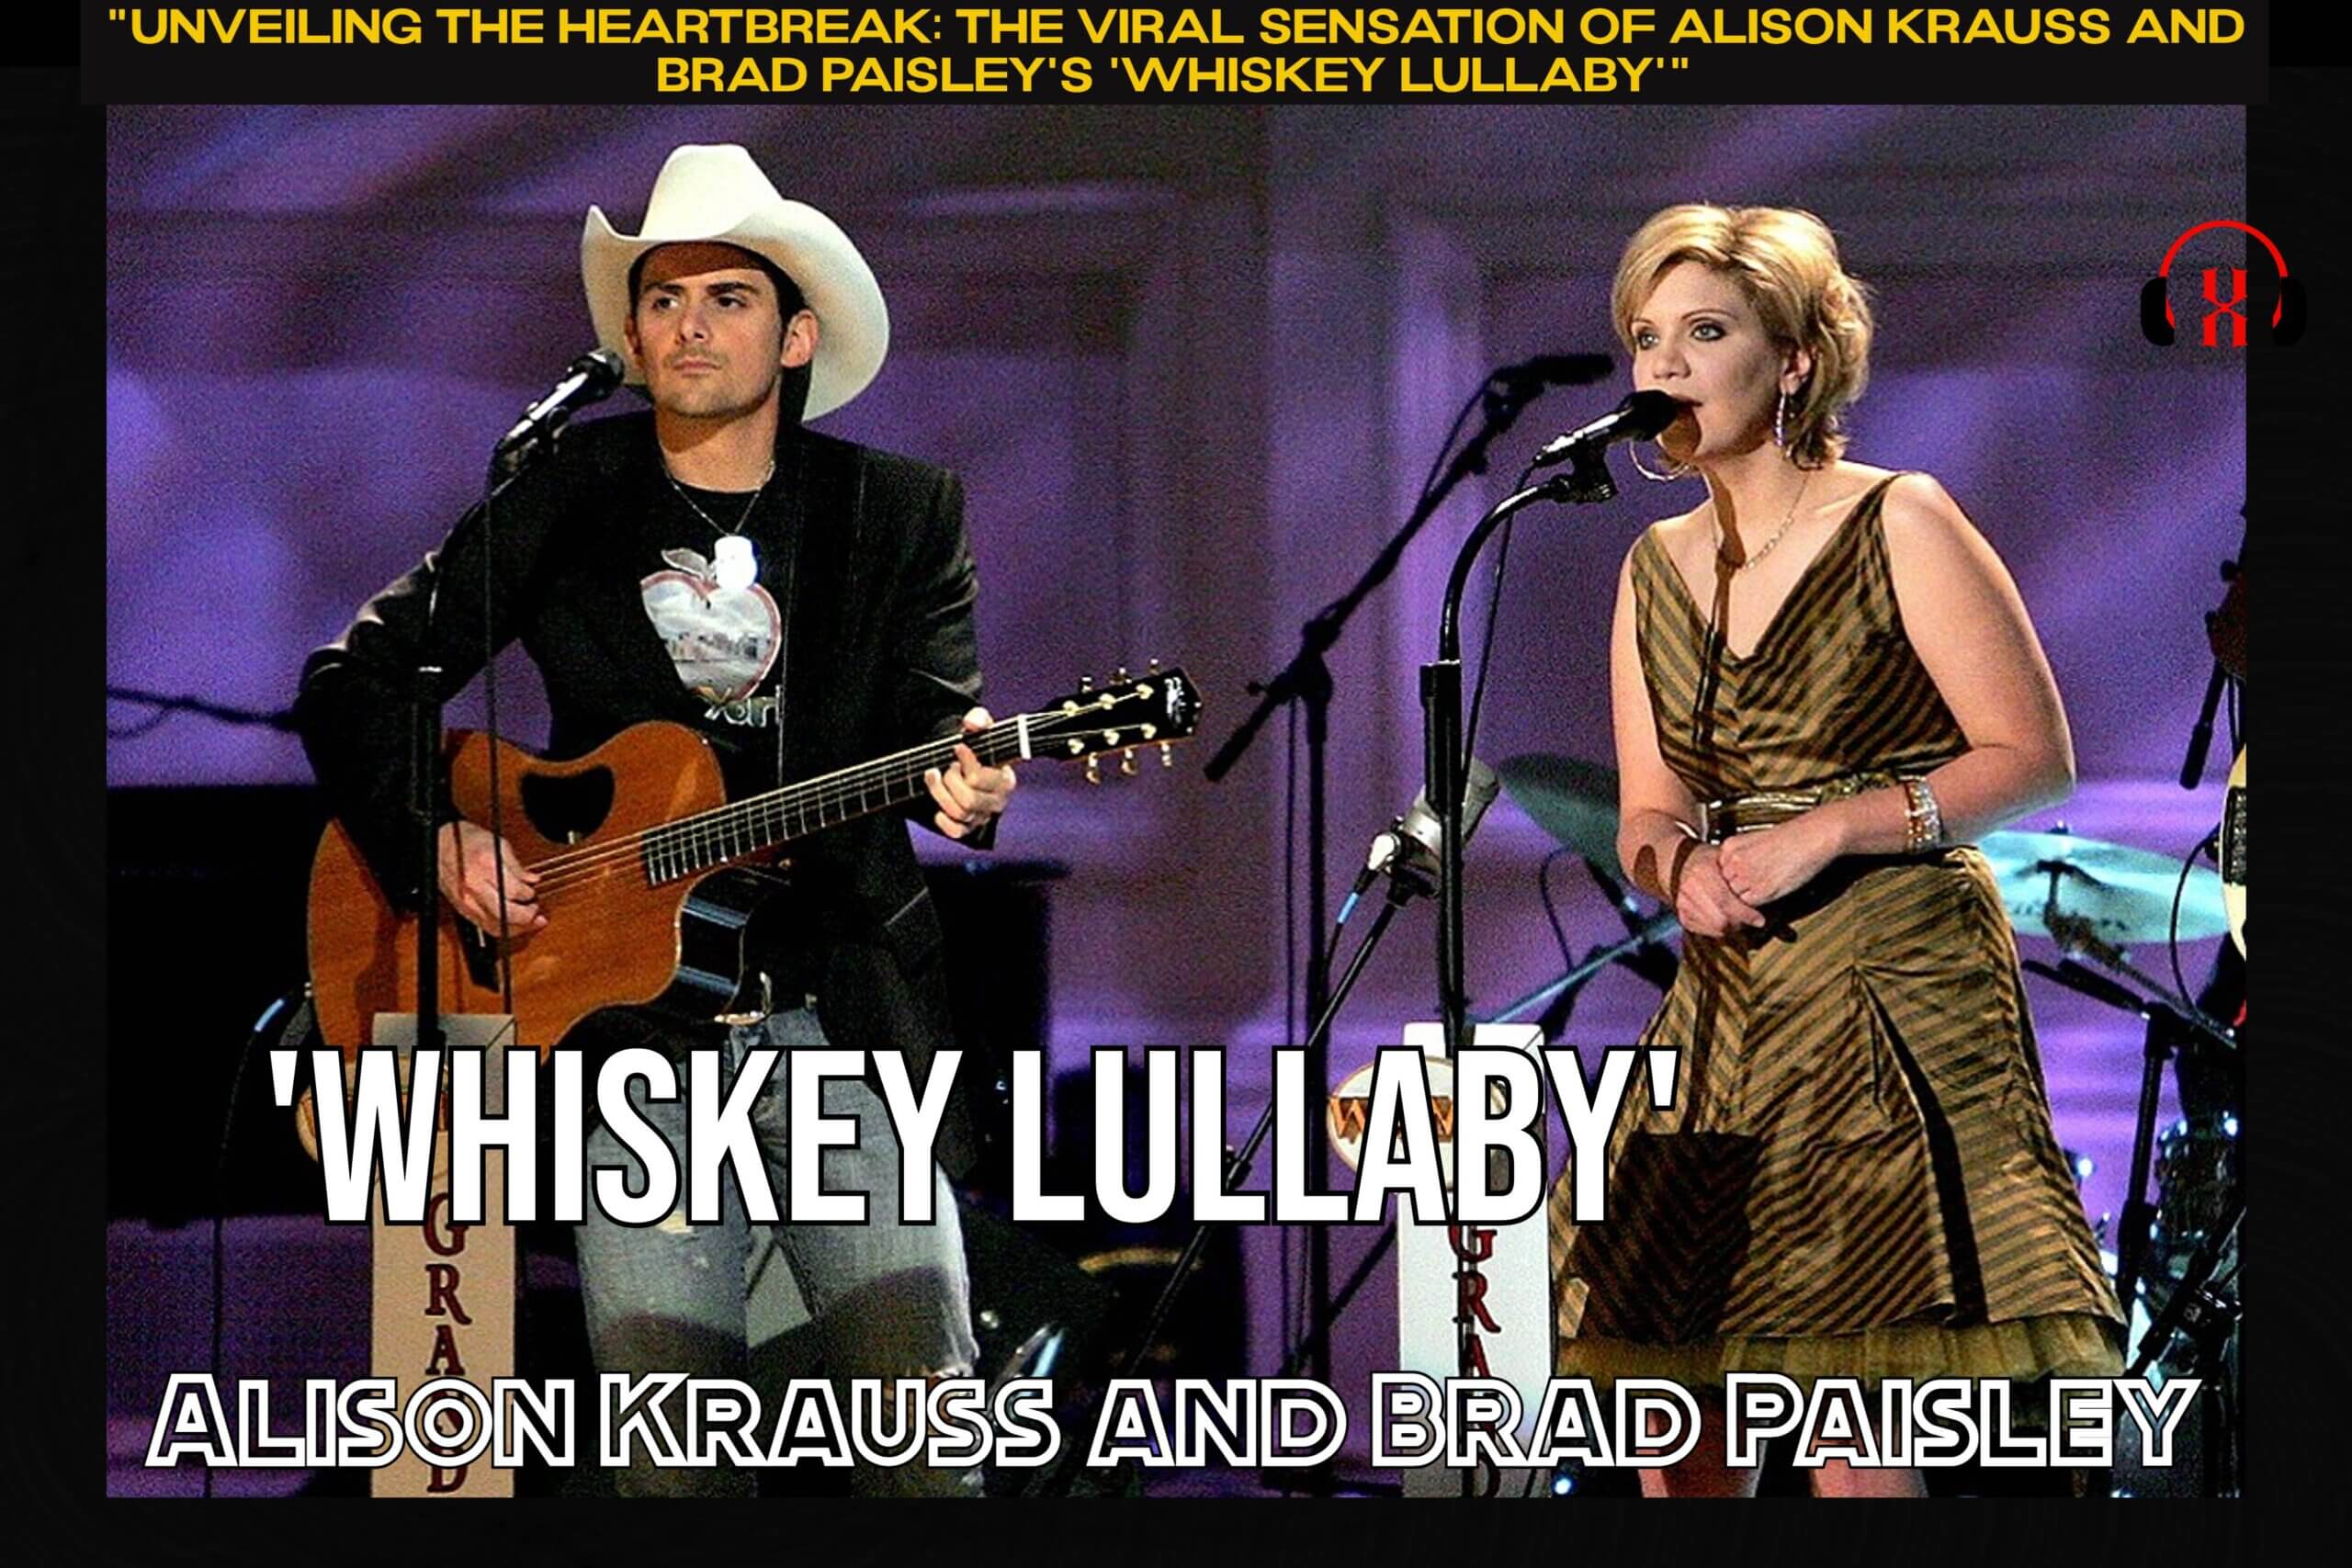 "Unveiling the Heartbreak: The Viral Sensation of Alison Krauss and Brad Paisley's 'Whiskey Lullaby'"